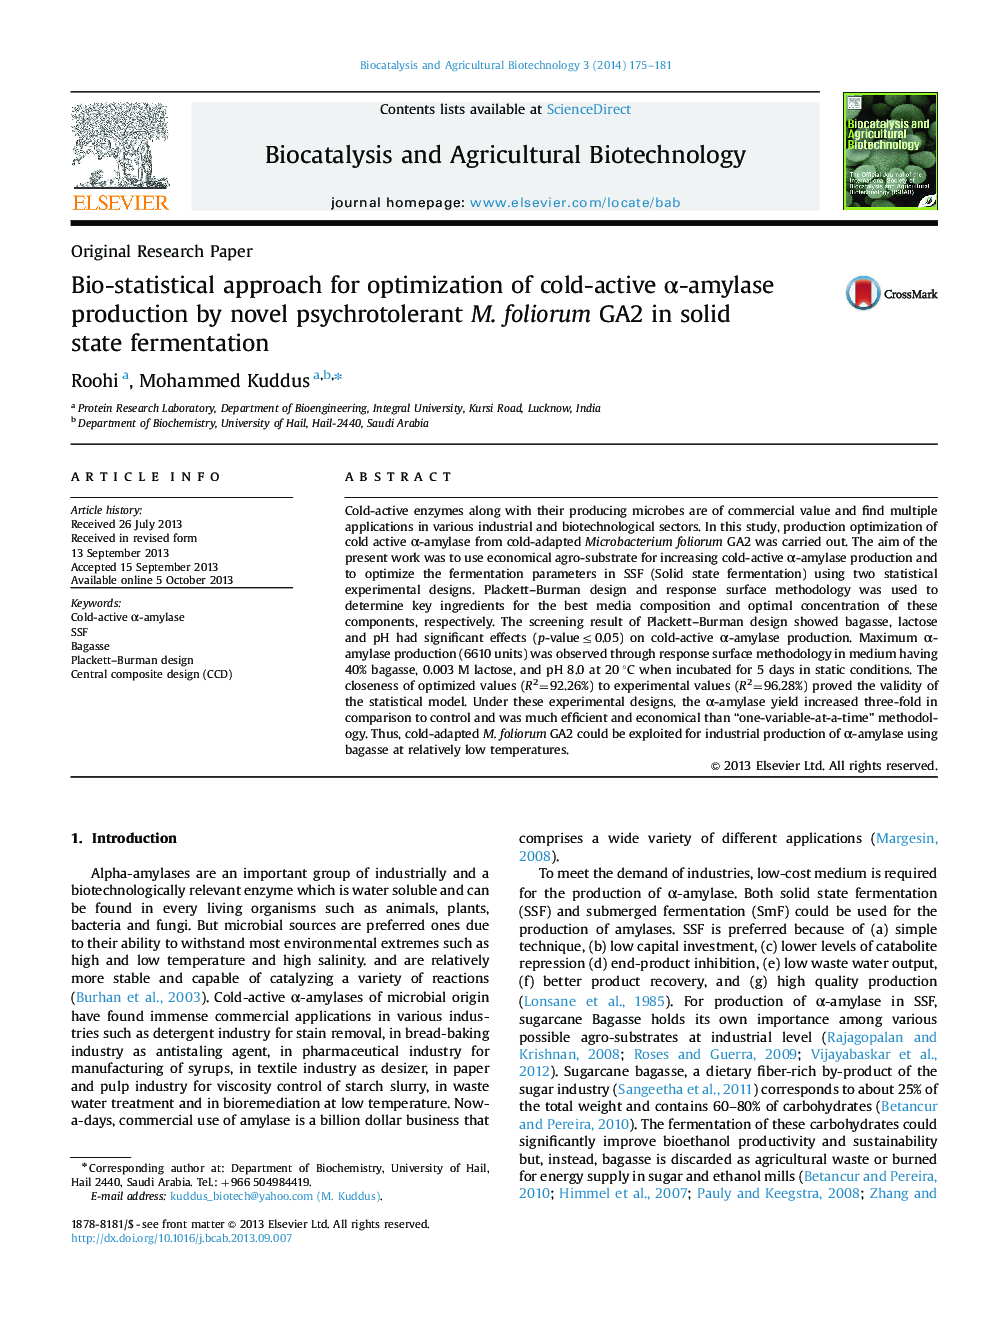 Bio-statistical approach for optimization of cold-active α-amylase production by novel psychrotolerant M. foliorum GA2 in solid state fermentation